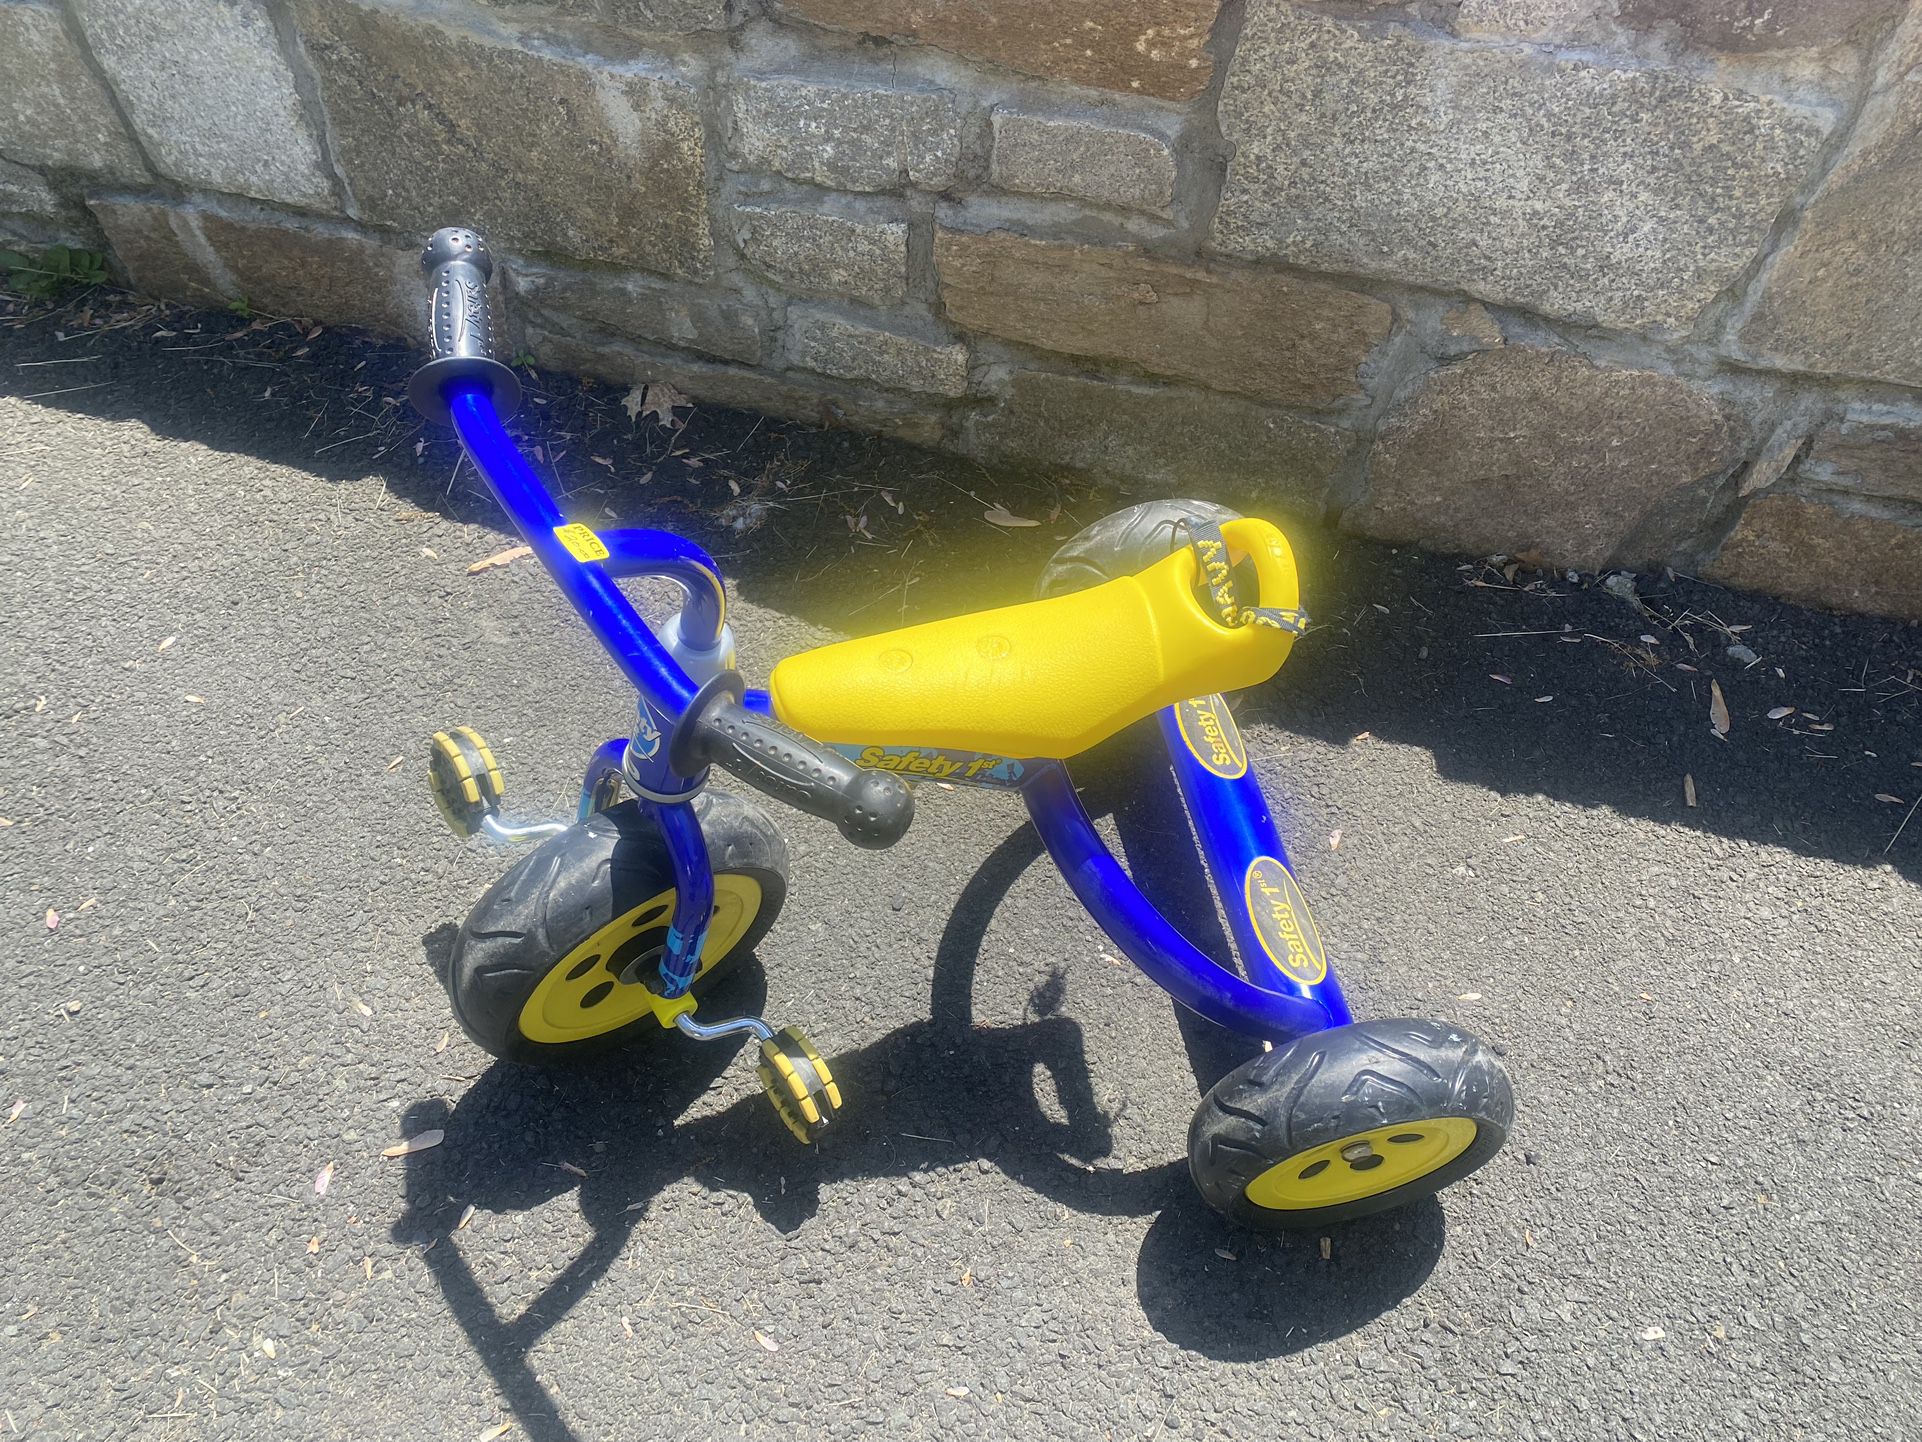 Toddler Tricycle 